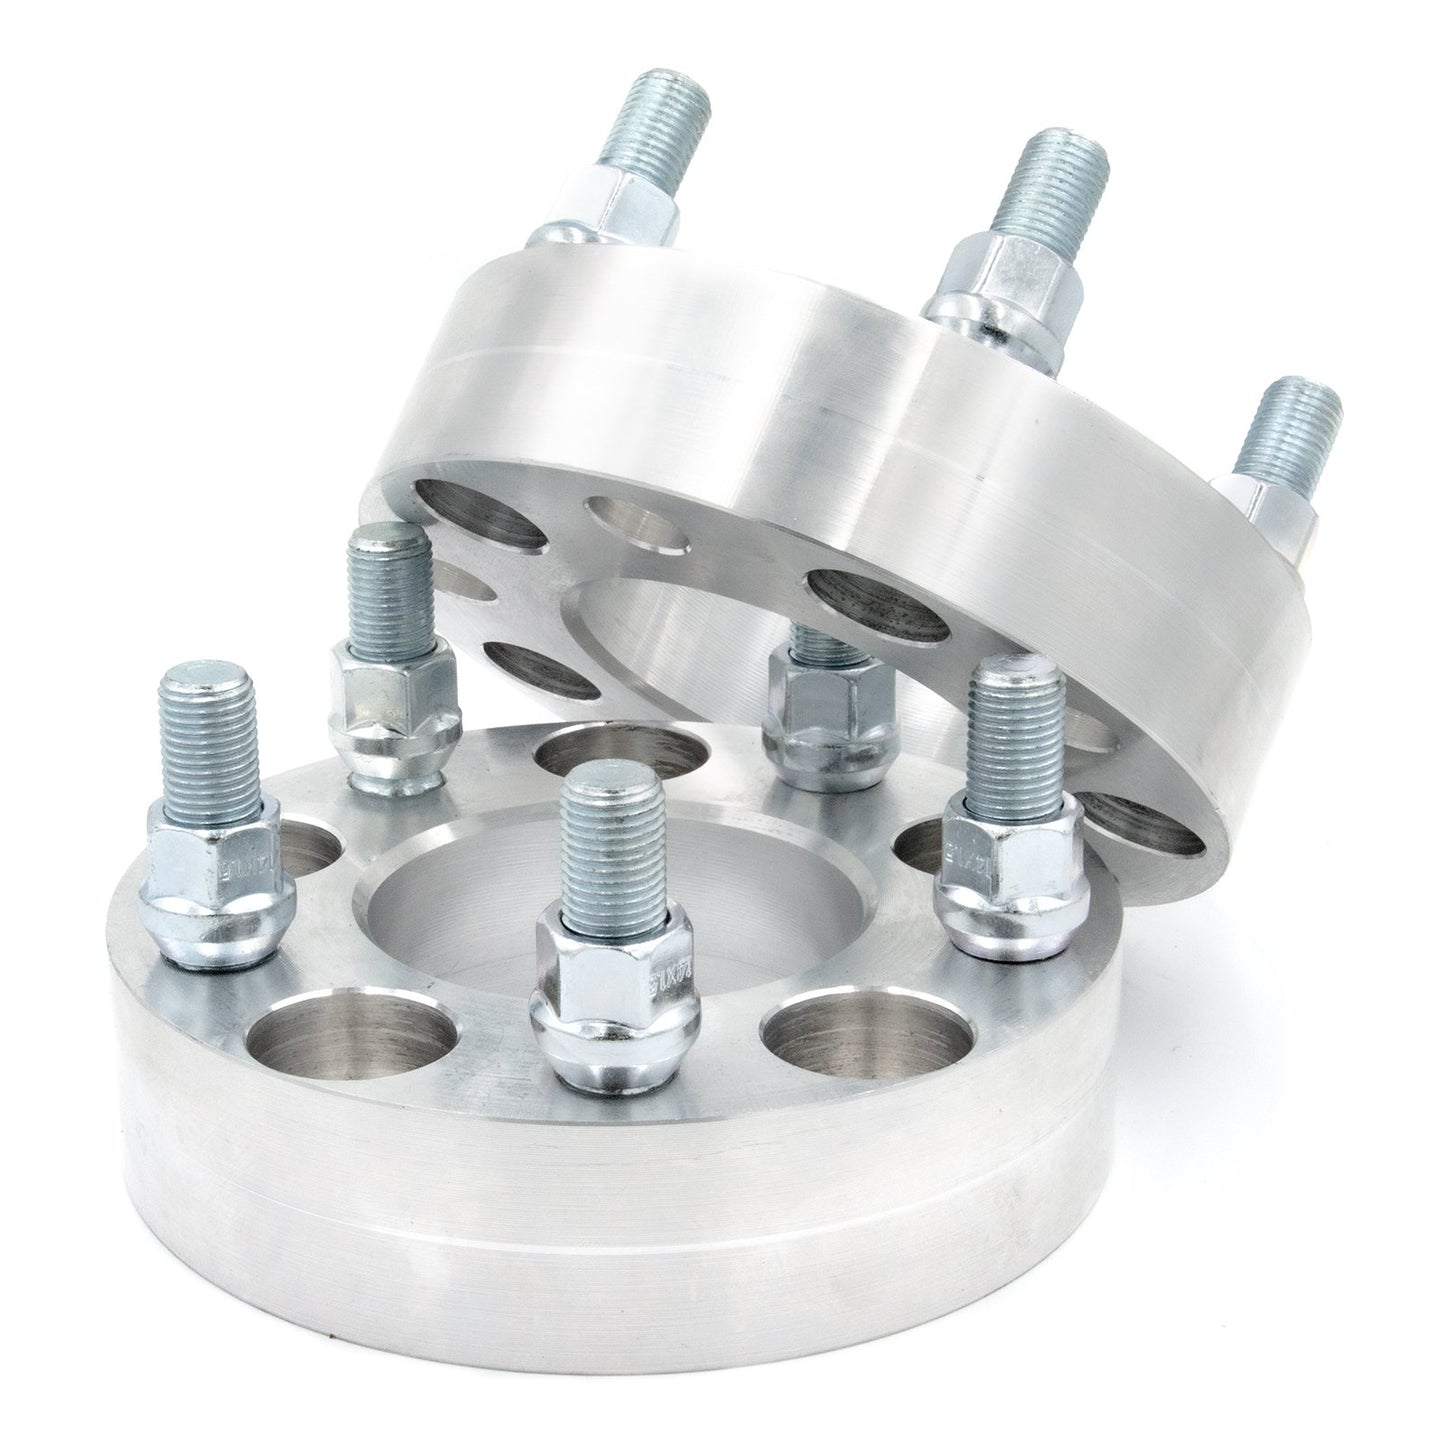 5x5" to 5x115 Wheel Spacer/Adapter - Thickness: 3/4"- 4"